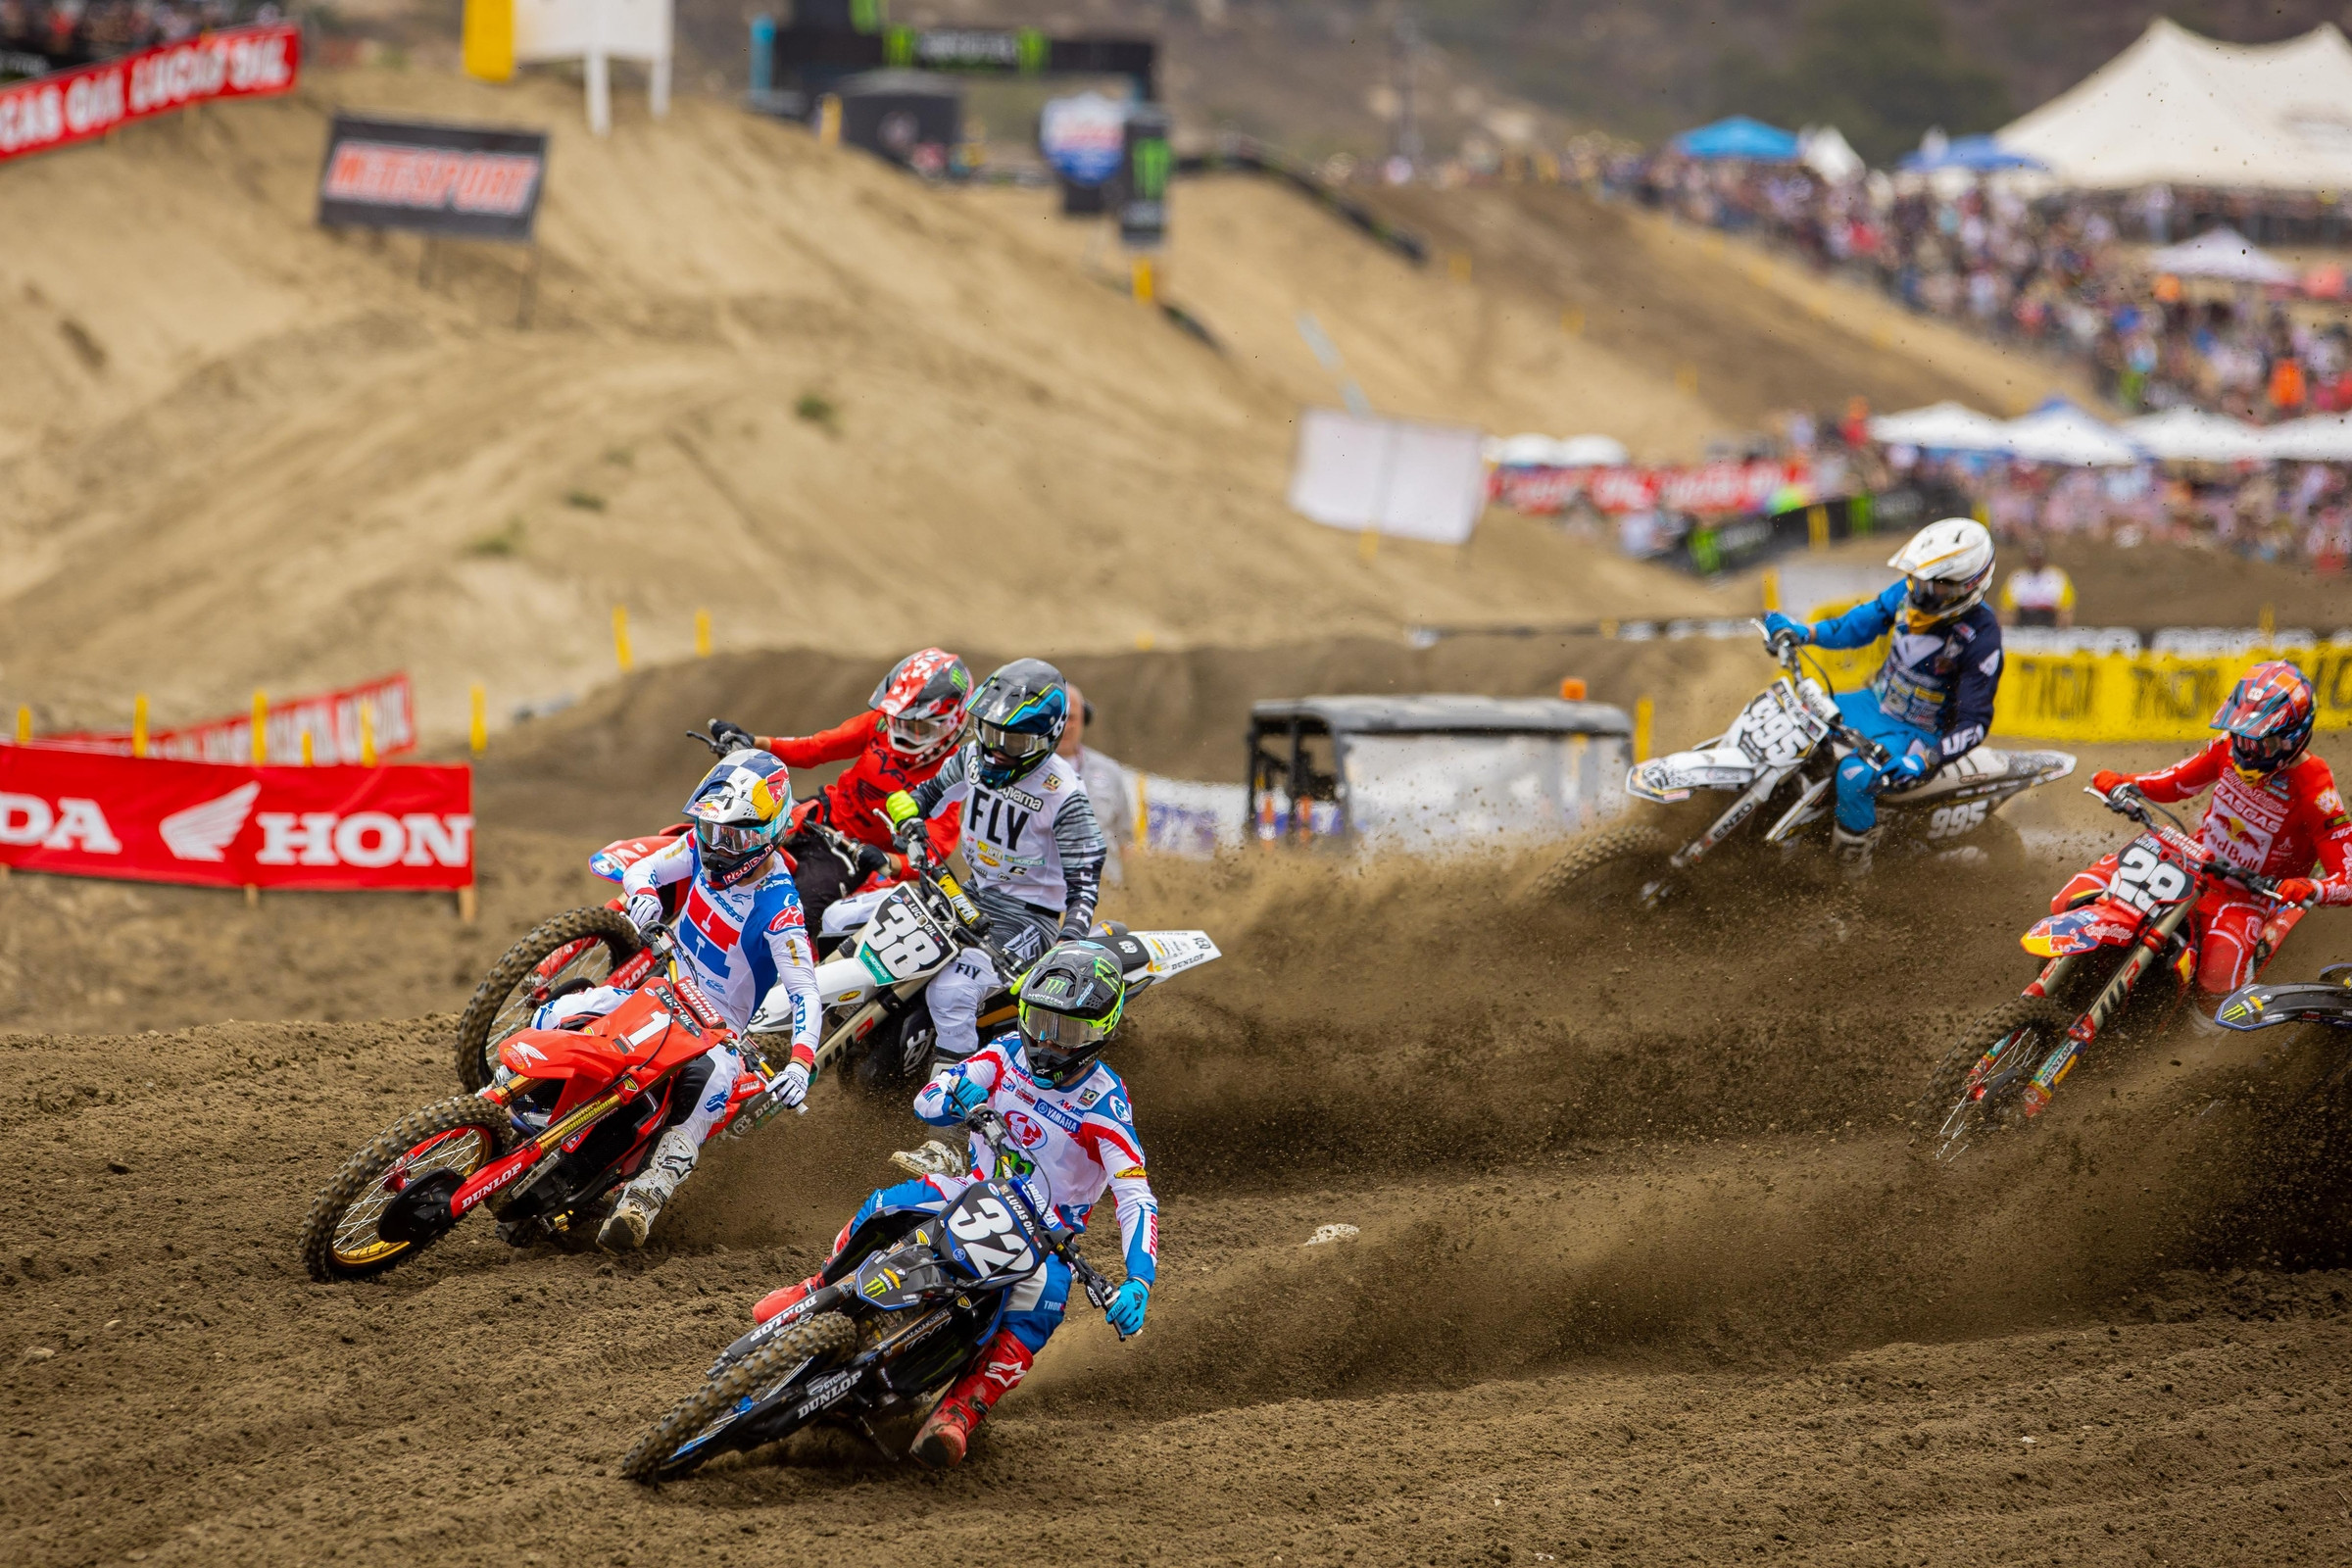 Watch Hangtown Qualifying Will Be Streamed Free on YouTube